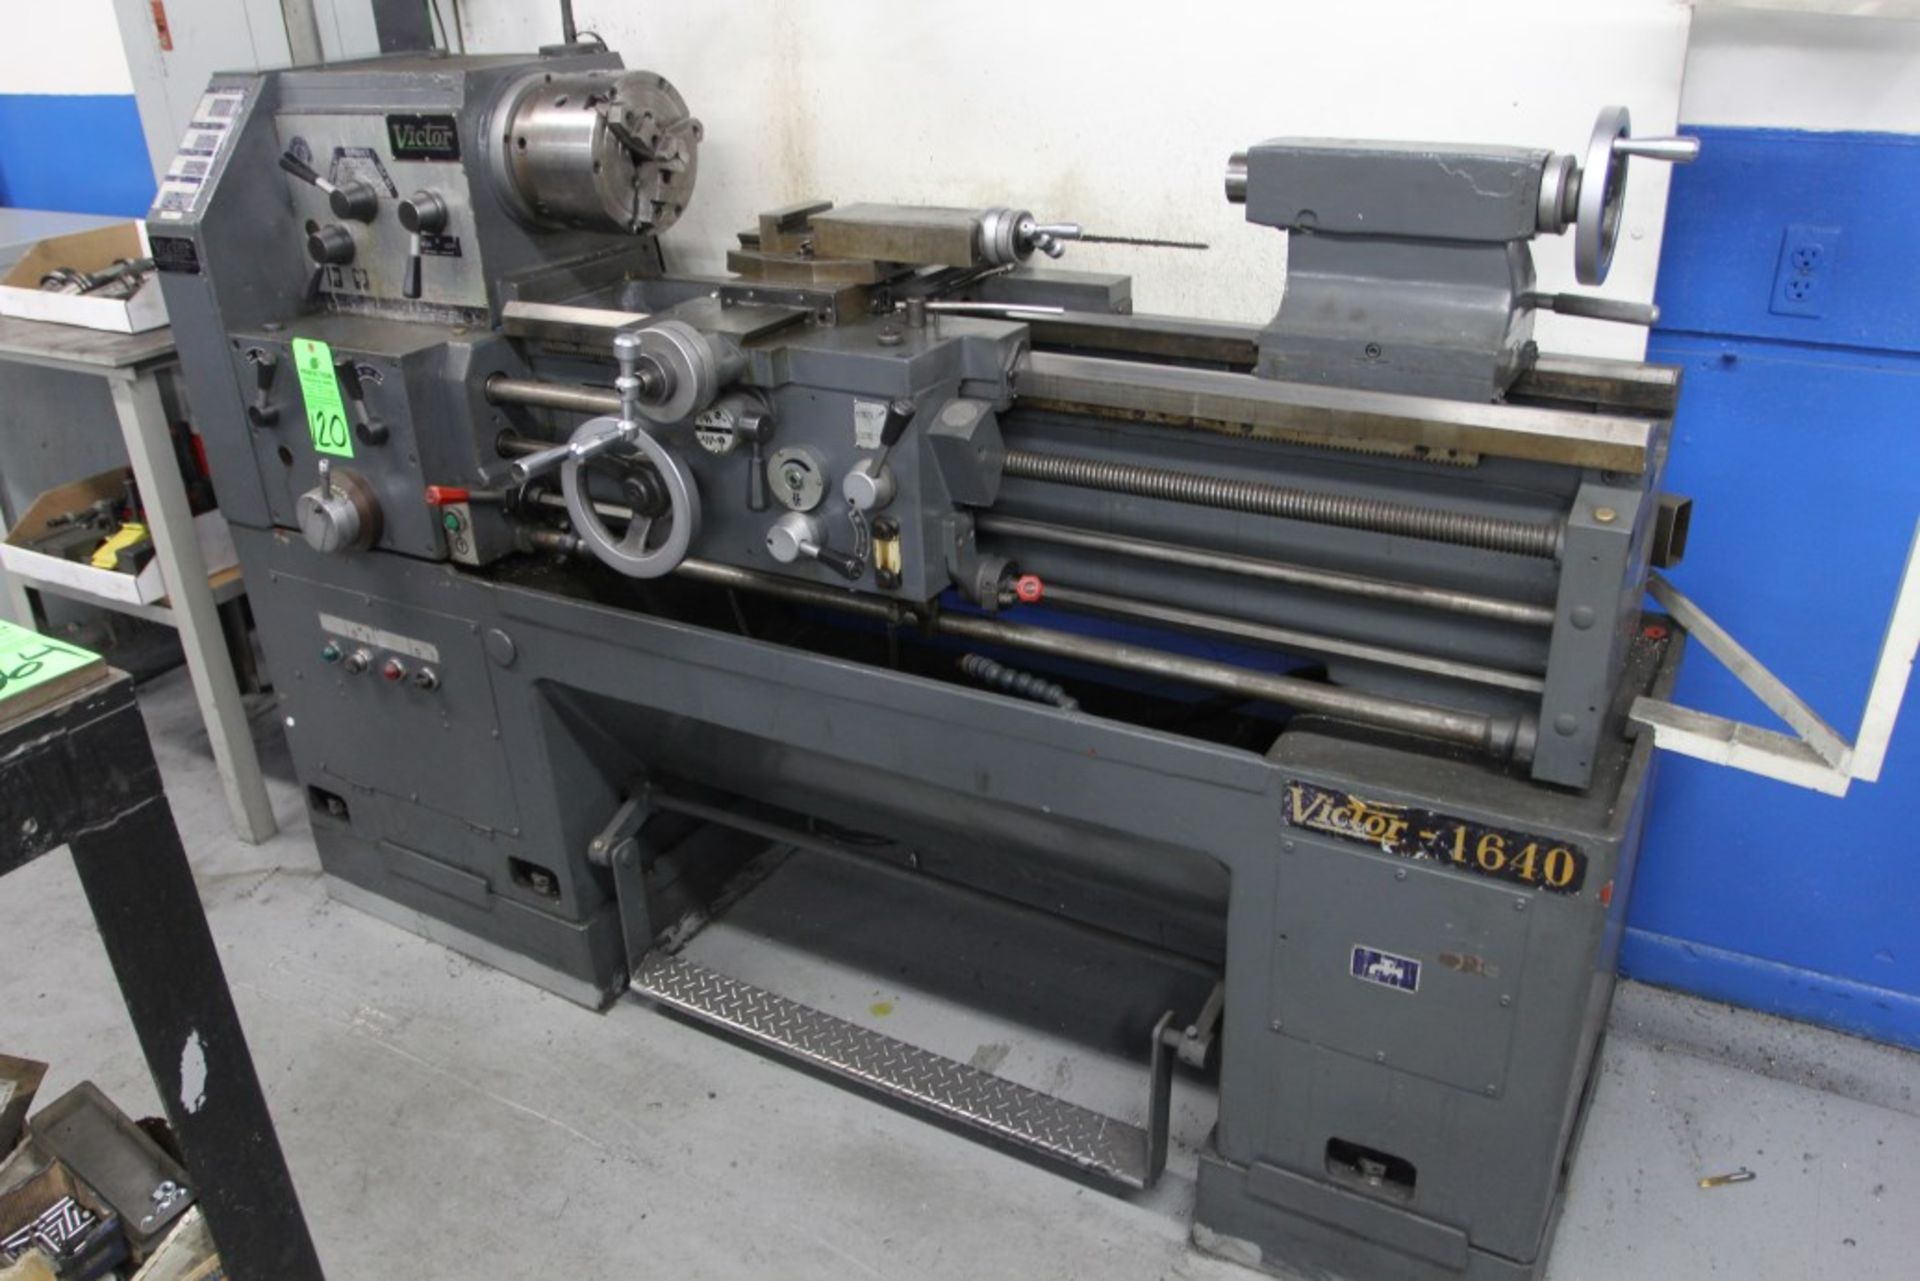 Victor 1640 Lathe; 16" Swing; 40" Between Centers; 8" 3-Jaw Chuck; Tool Post; 1800 RPM; Sargon DRO